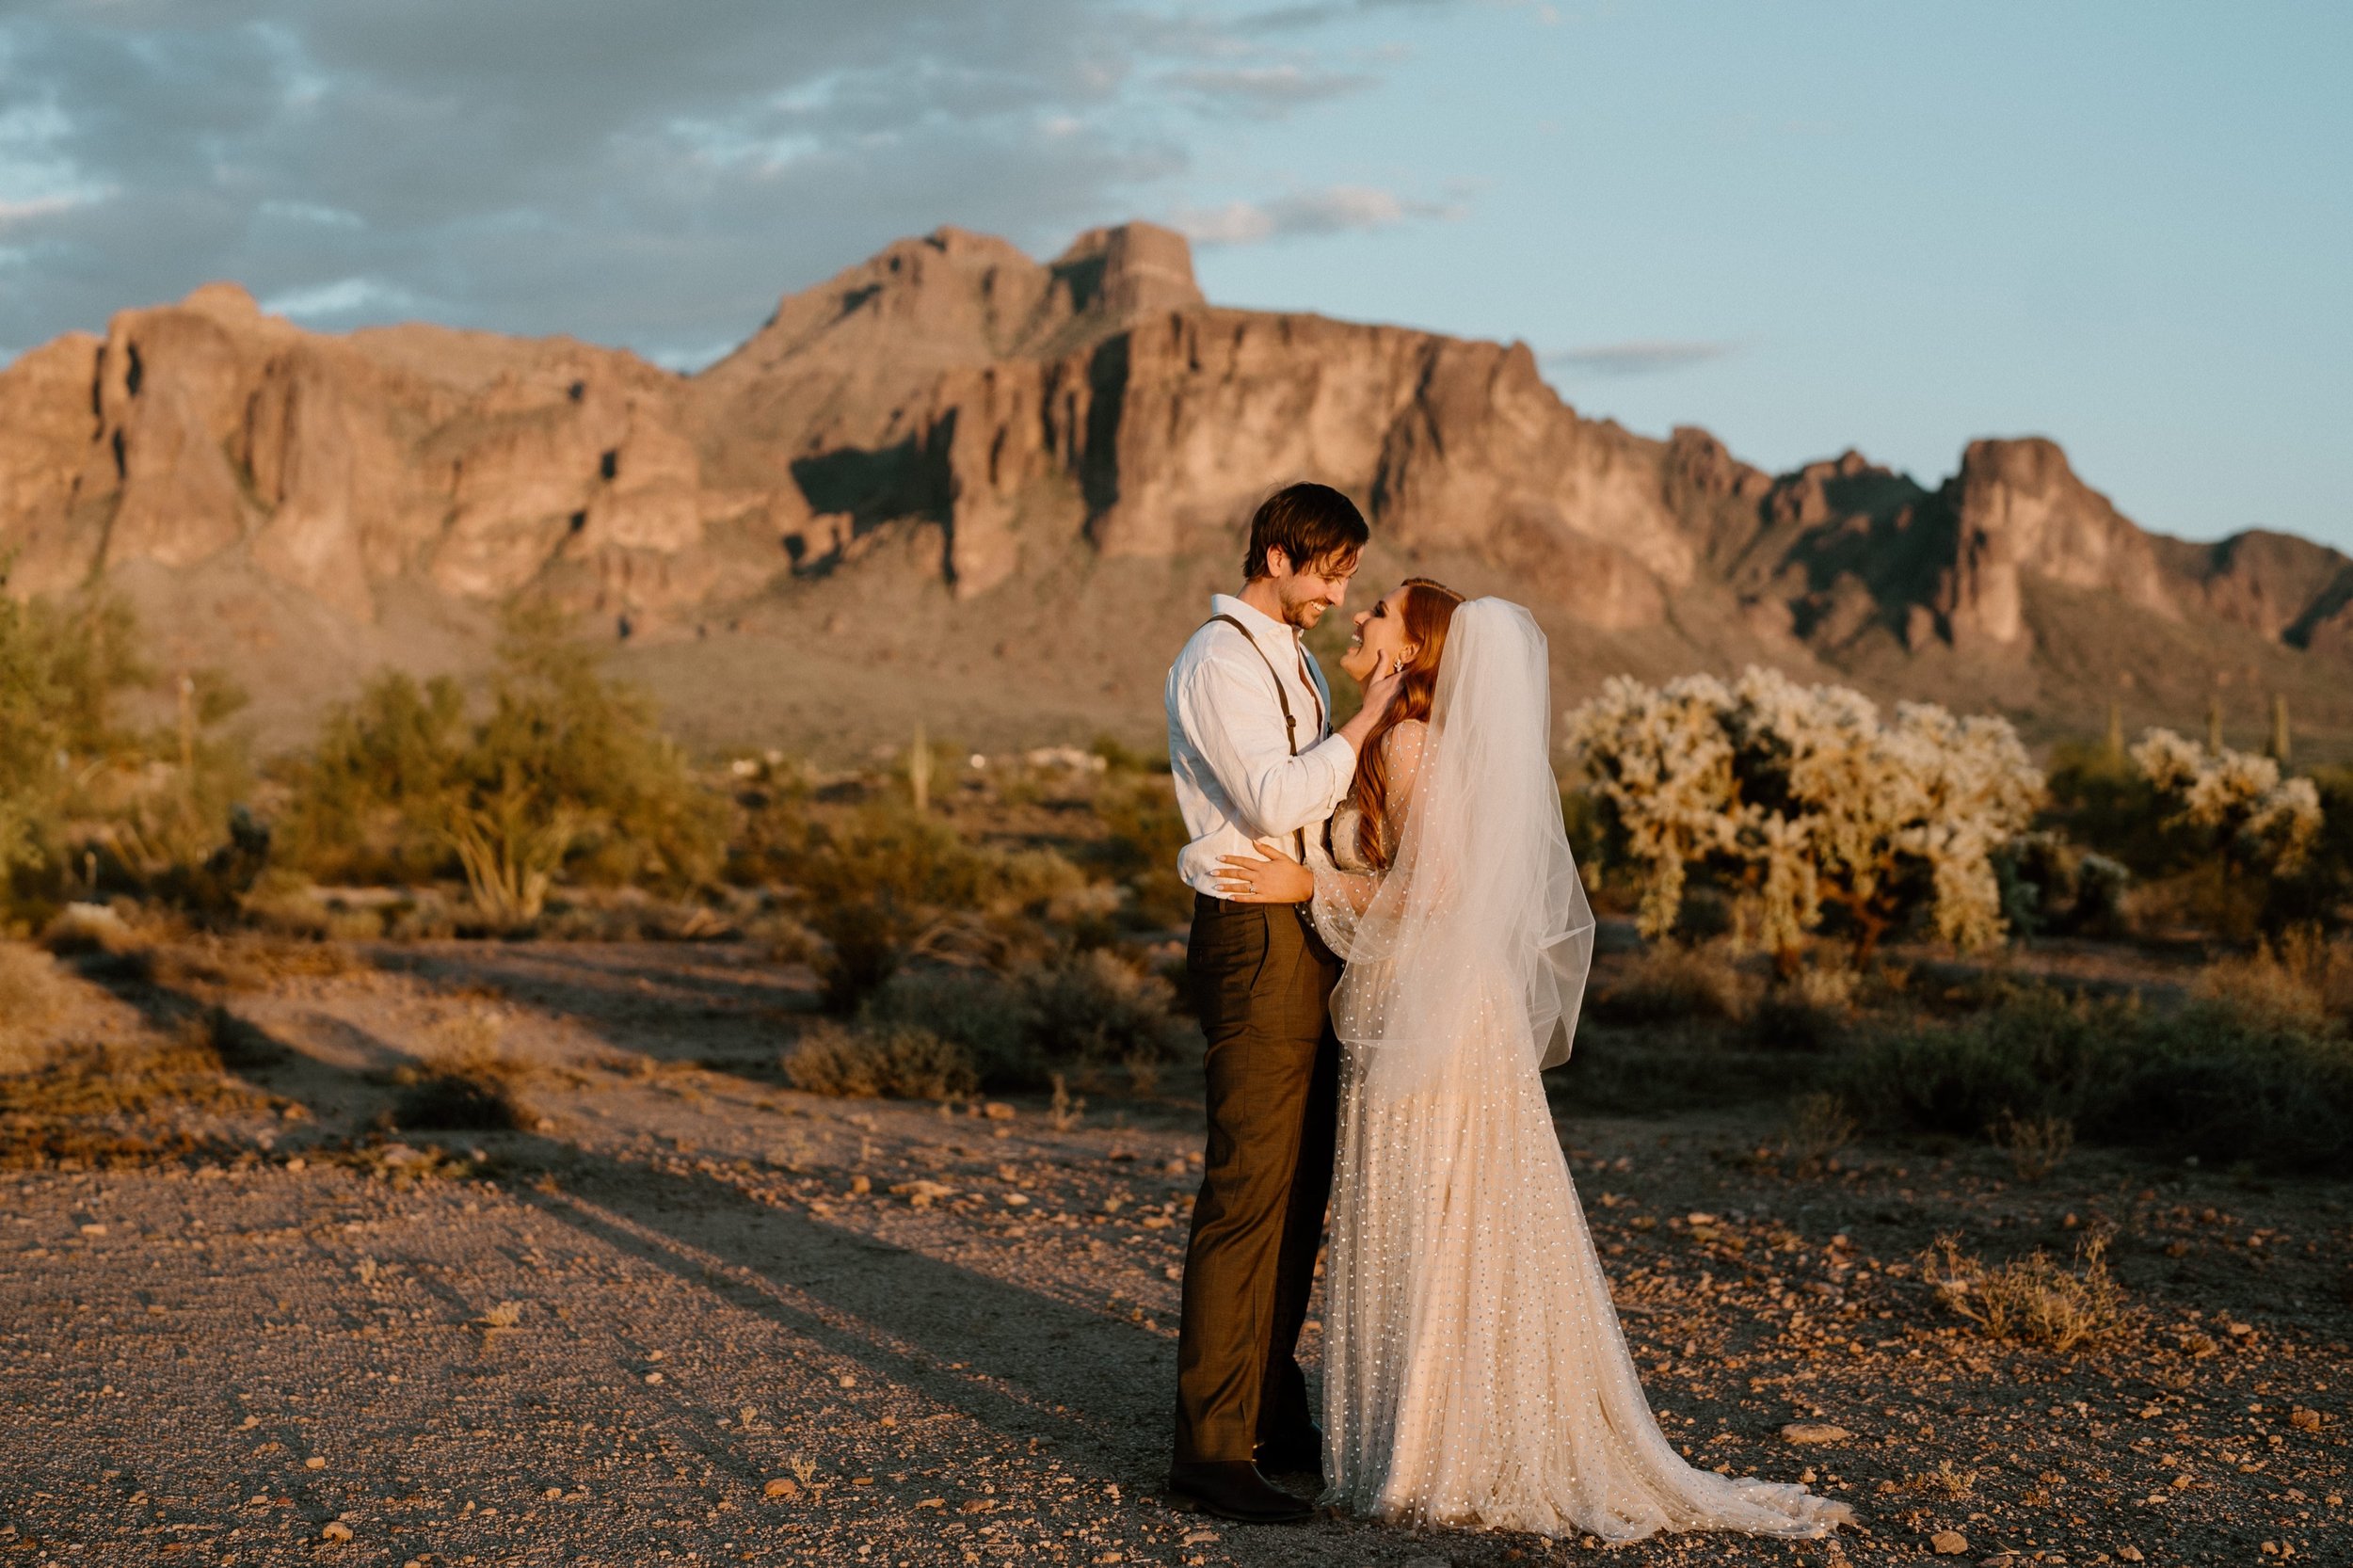 036_Wedding at The Paseo venue in Apache Junction, Arizona only 45 minutes from Phoenix..jpg